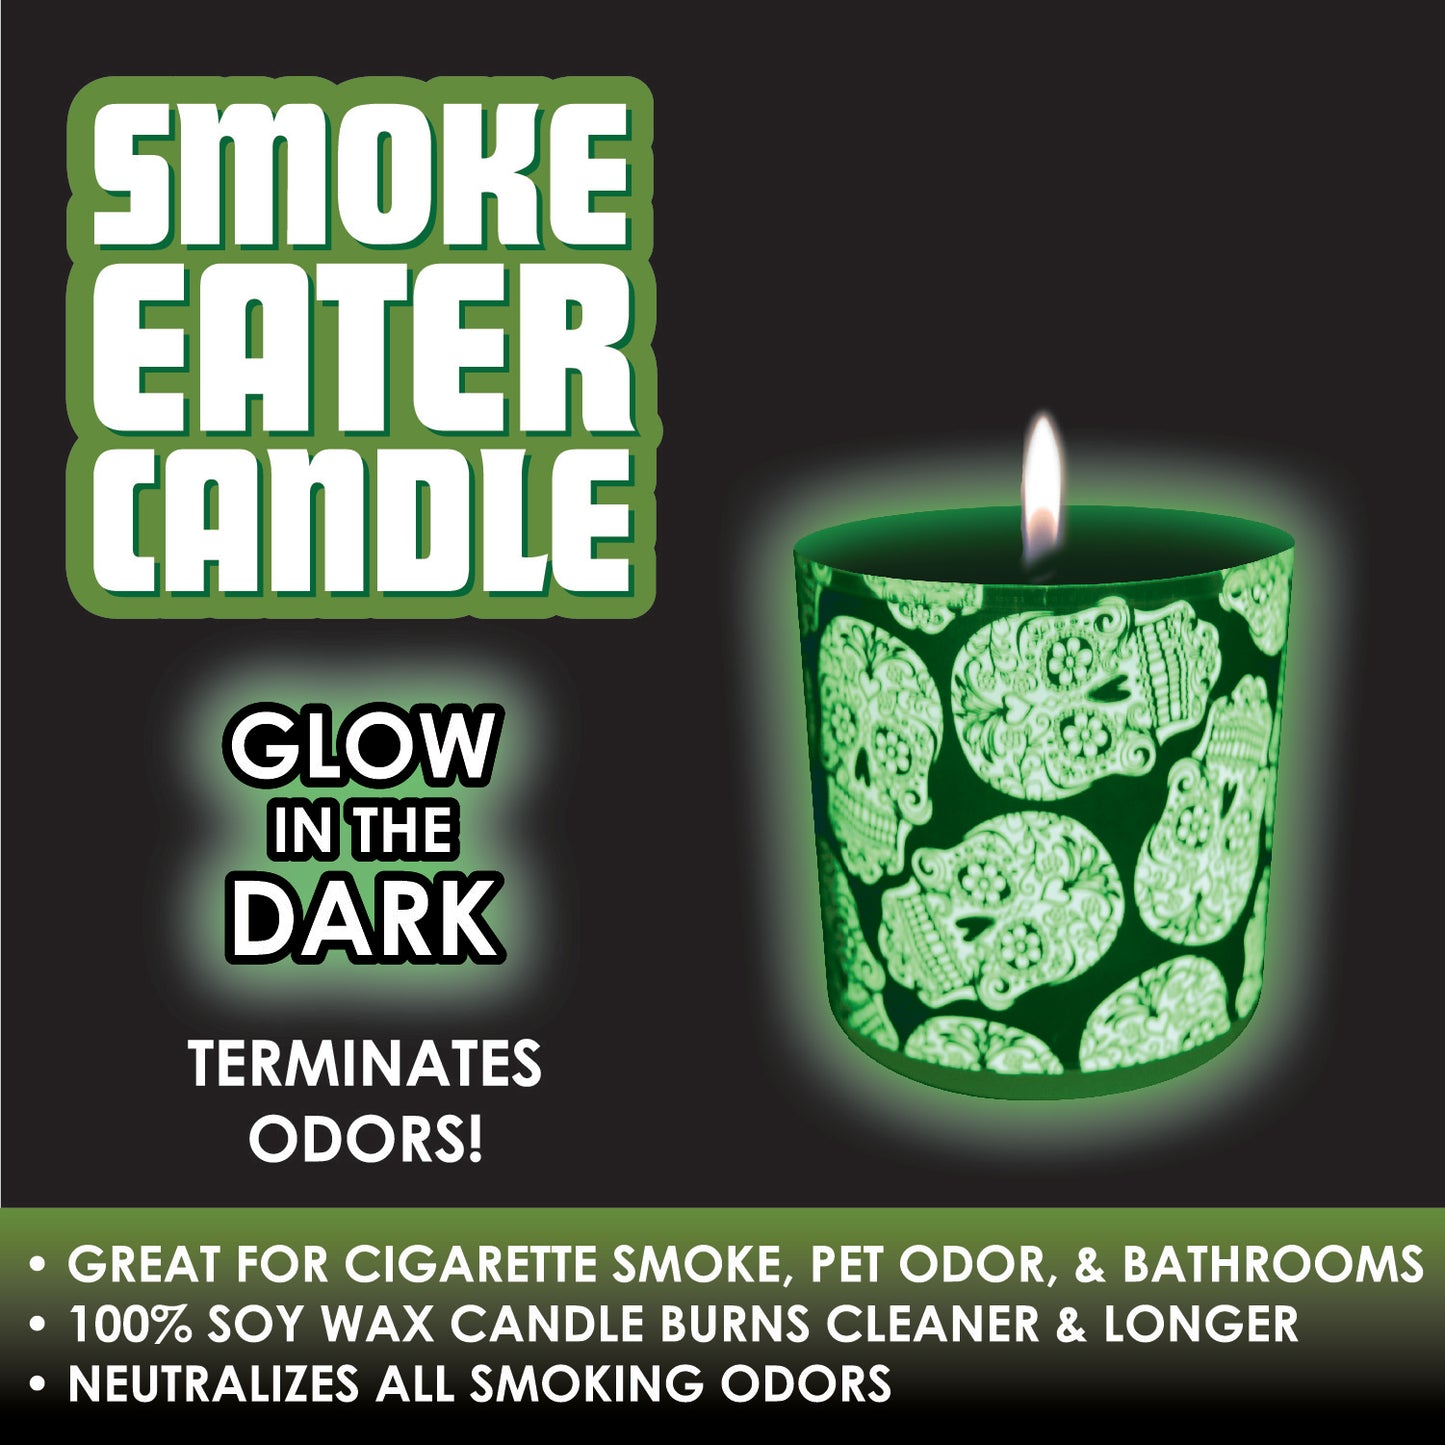 ITEM NUMBER 021873 GLOW in the DARK CANDLE 6 PIECES PER DISPLAY